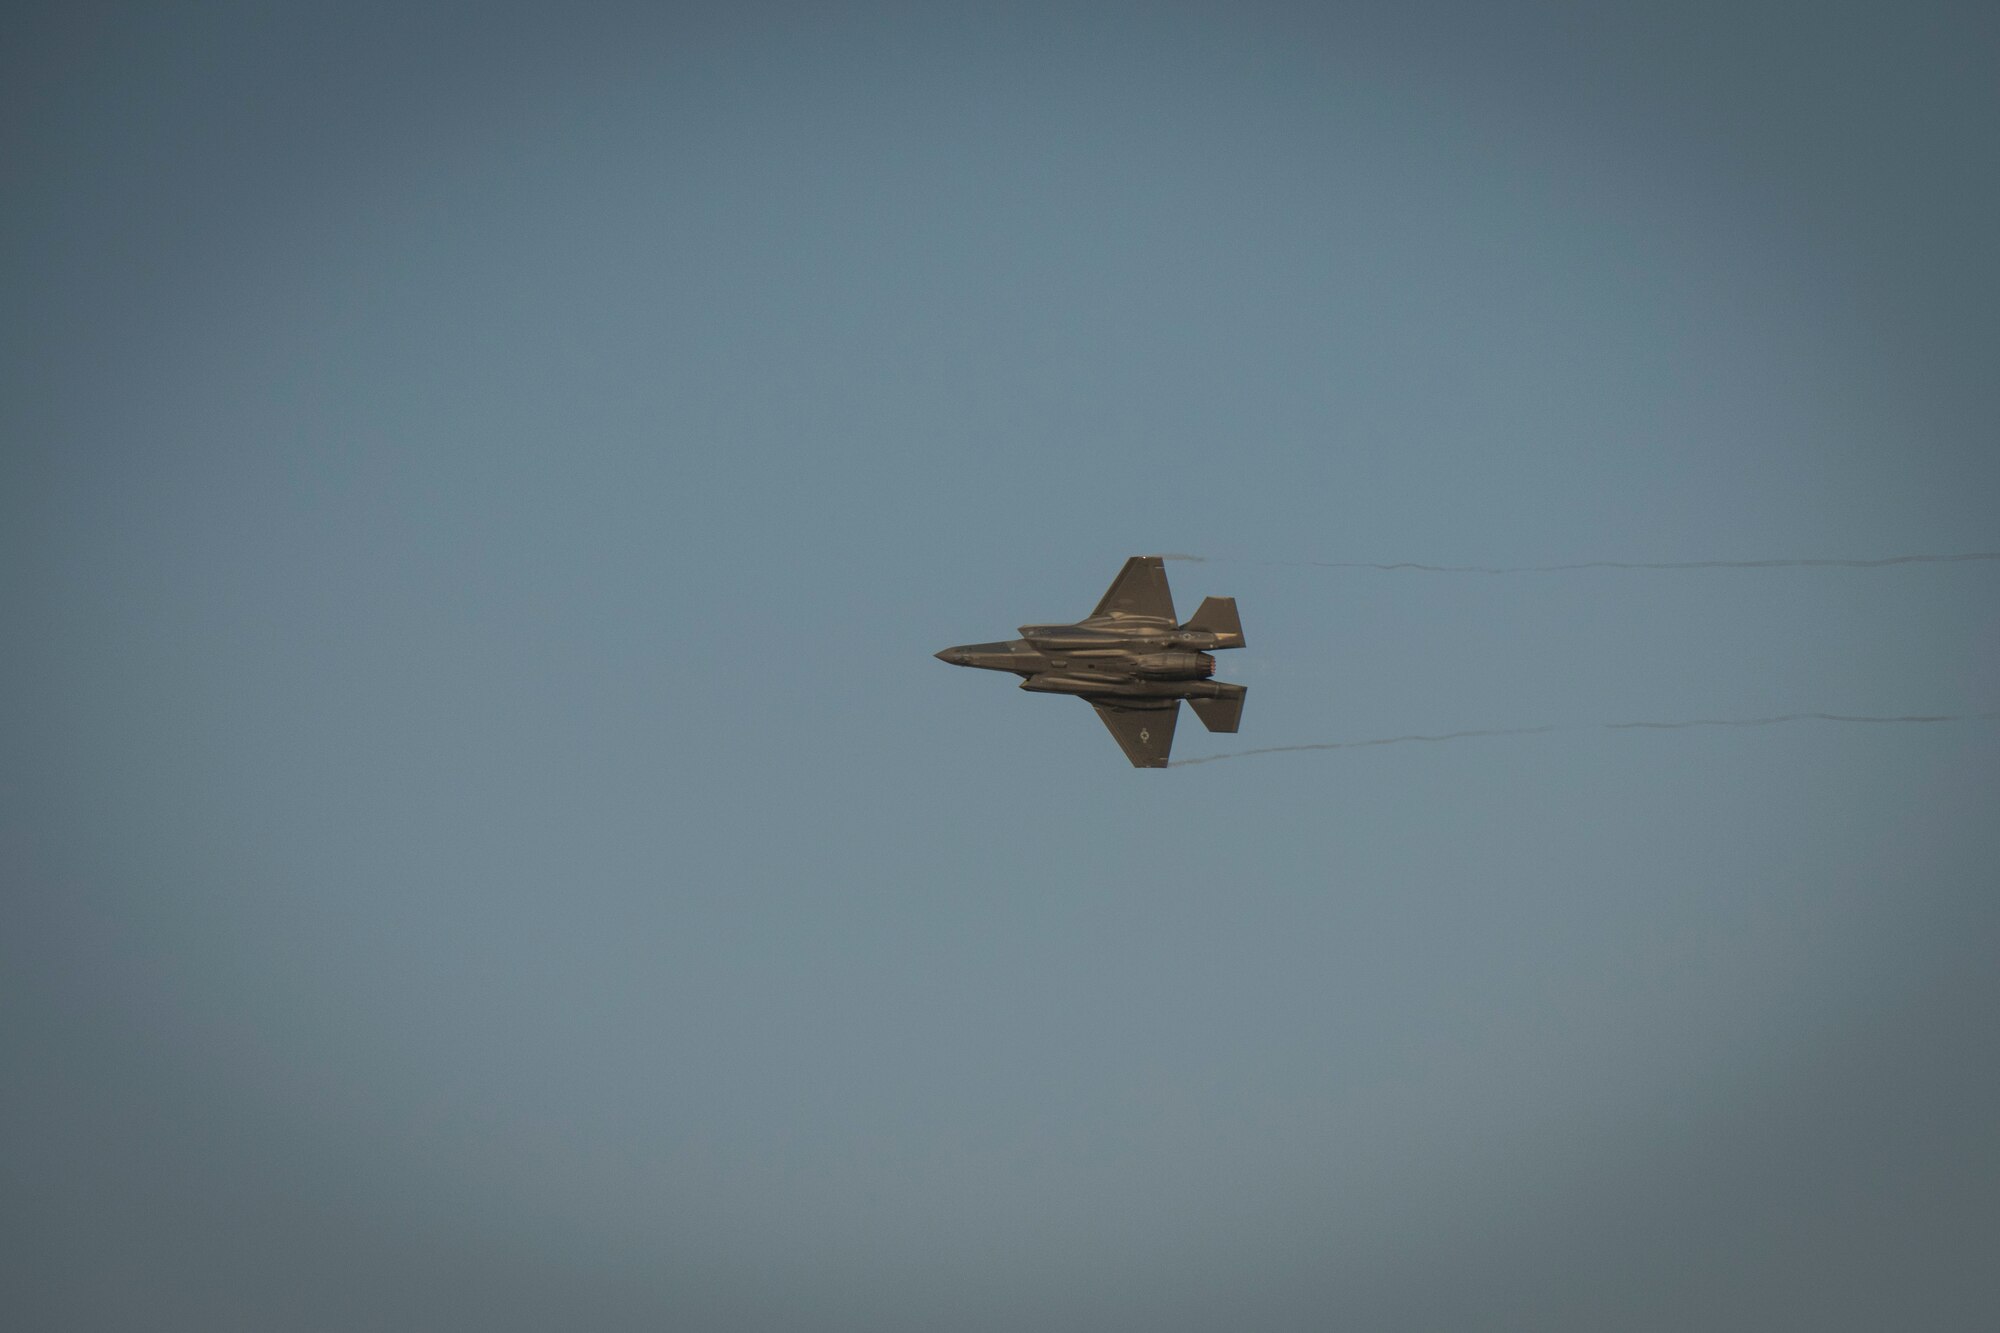 A U.S. Air Force F-35A Lightning II assigned to the 380th Air Expeditionary Wing performs an aerial demonstration at the Dubai Airshow, Nov. 19, 2019.